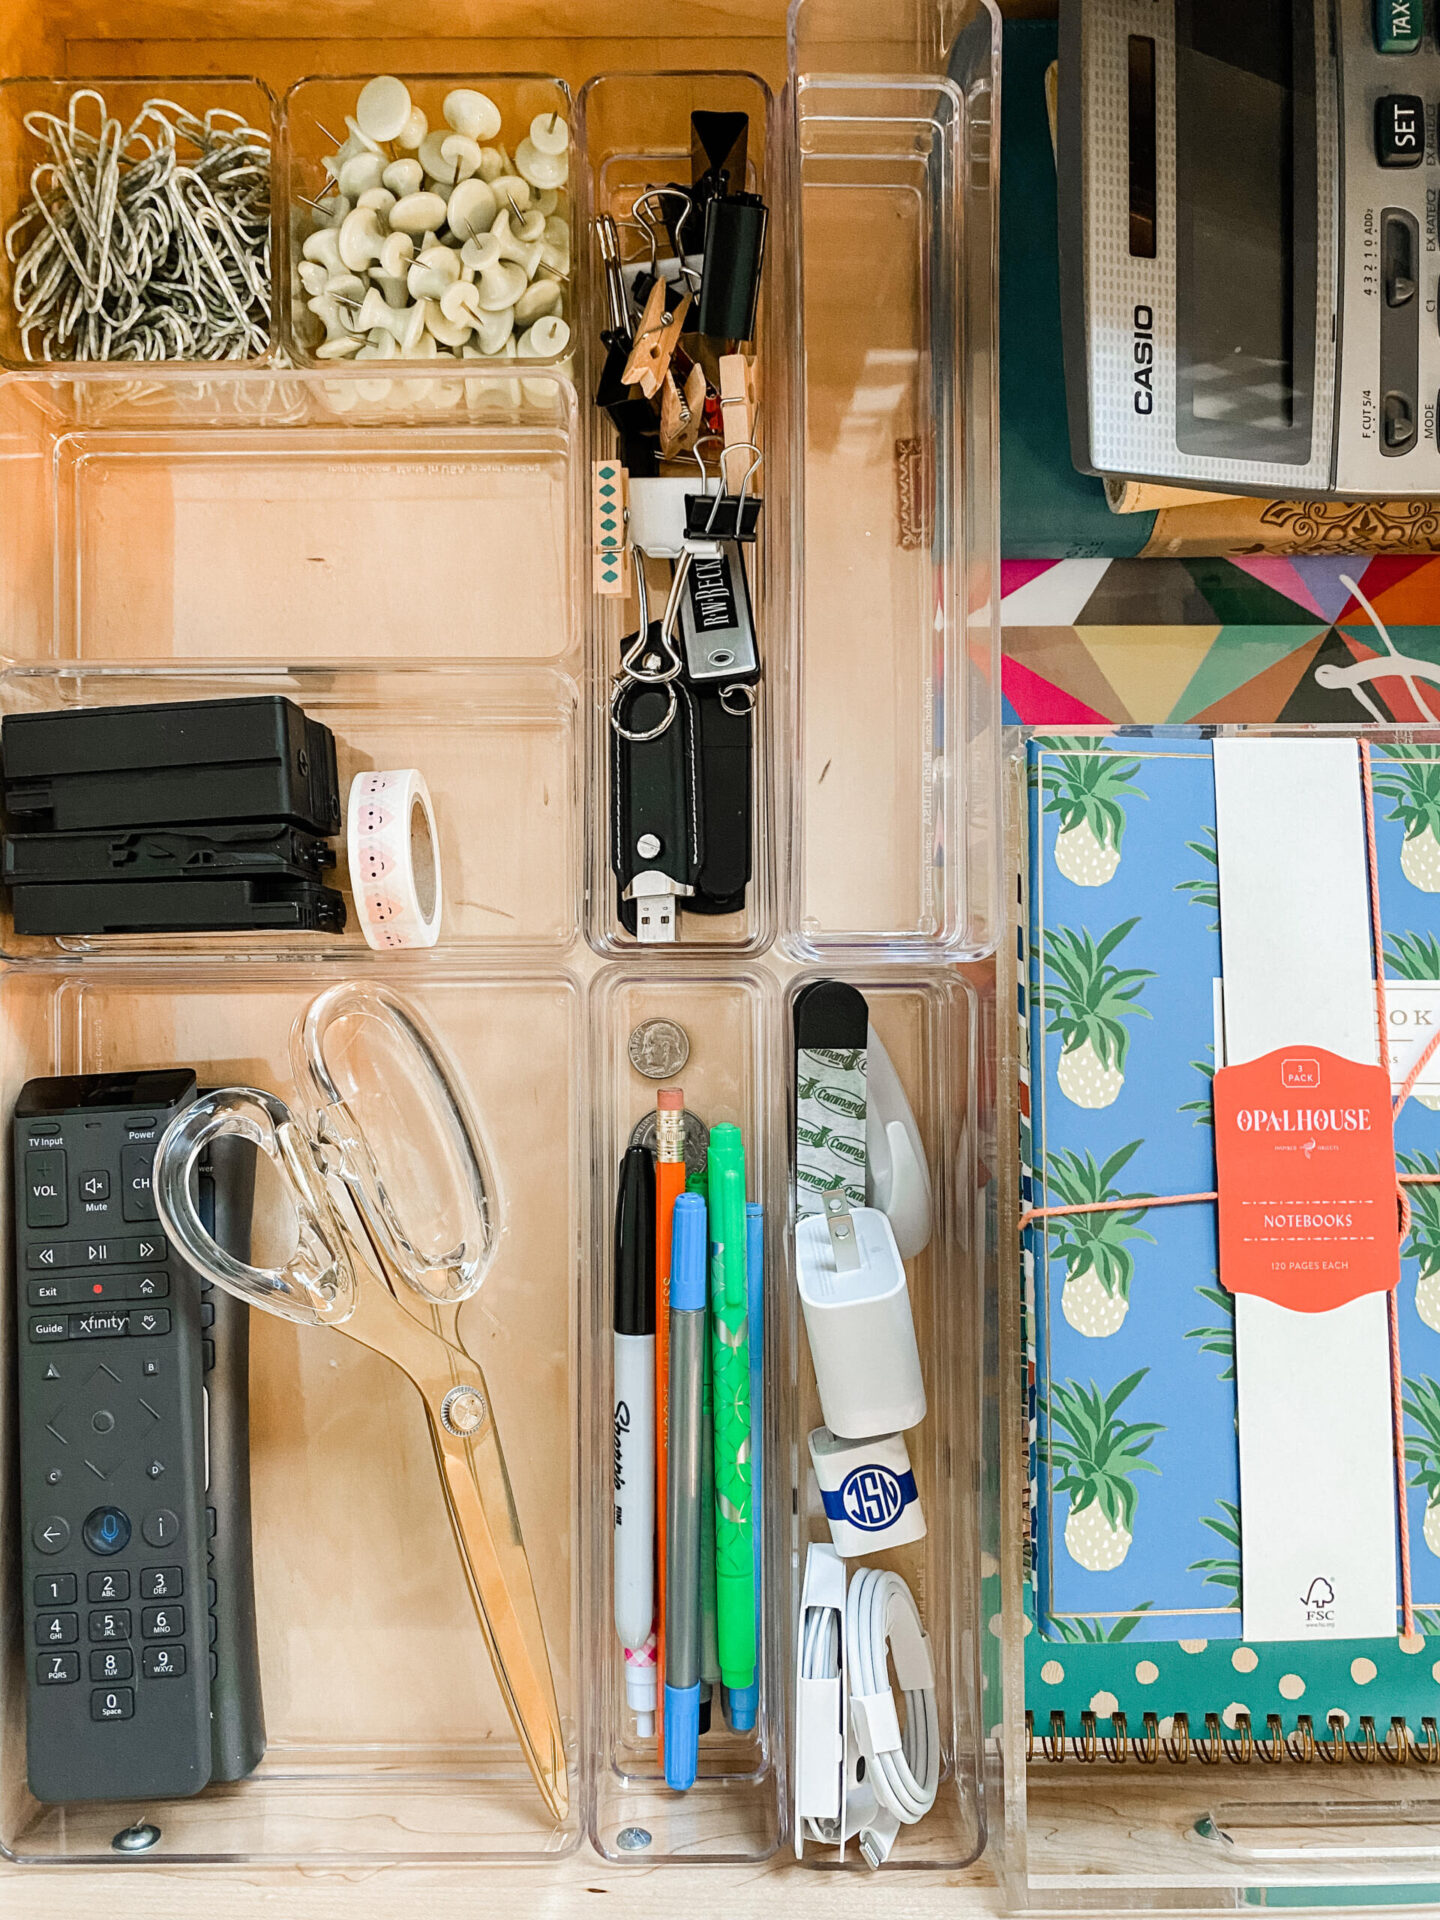 Acrylic Office Supplies by popular Nashville life and style blog, Hello Happiness: image of acrylic drawer organizers filled with paper clips, push pins, acrylic handle scissors, markers, notebooks, washi tape, and remote controls. 